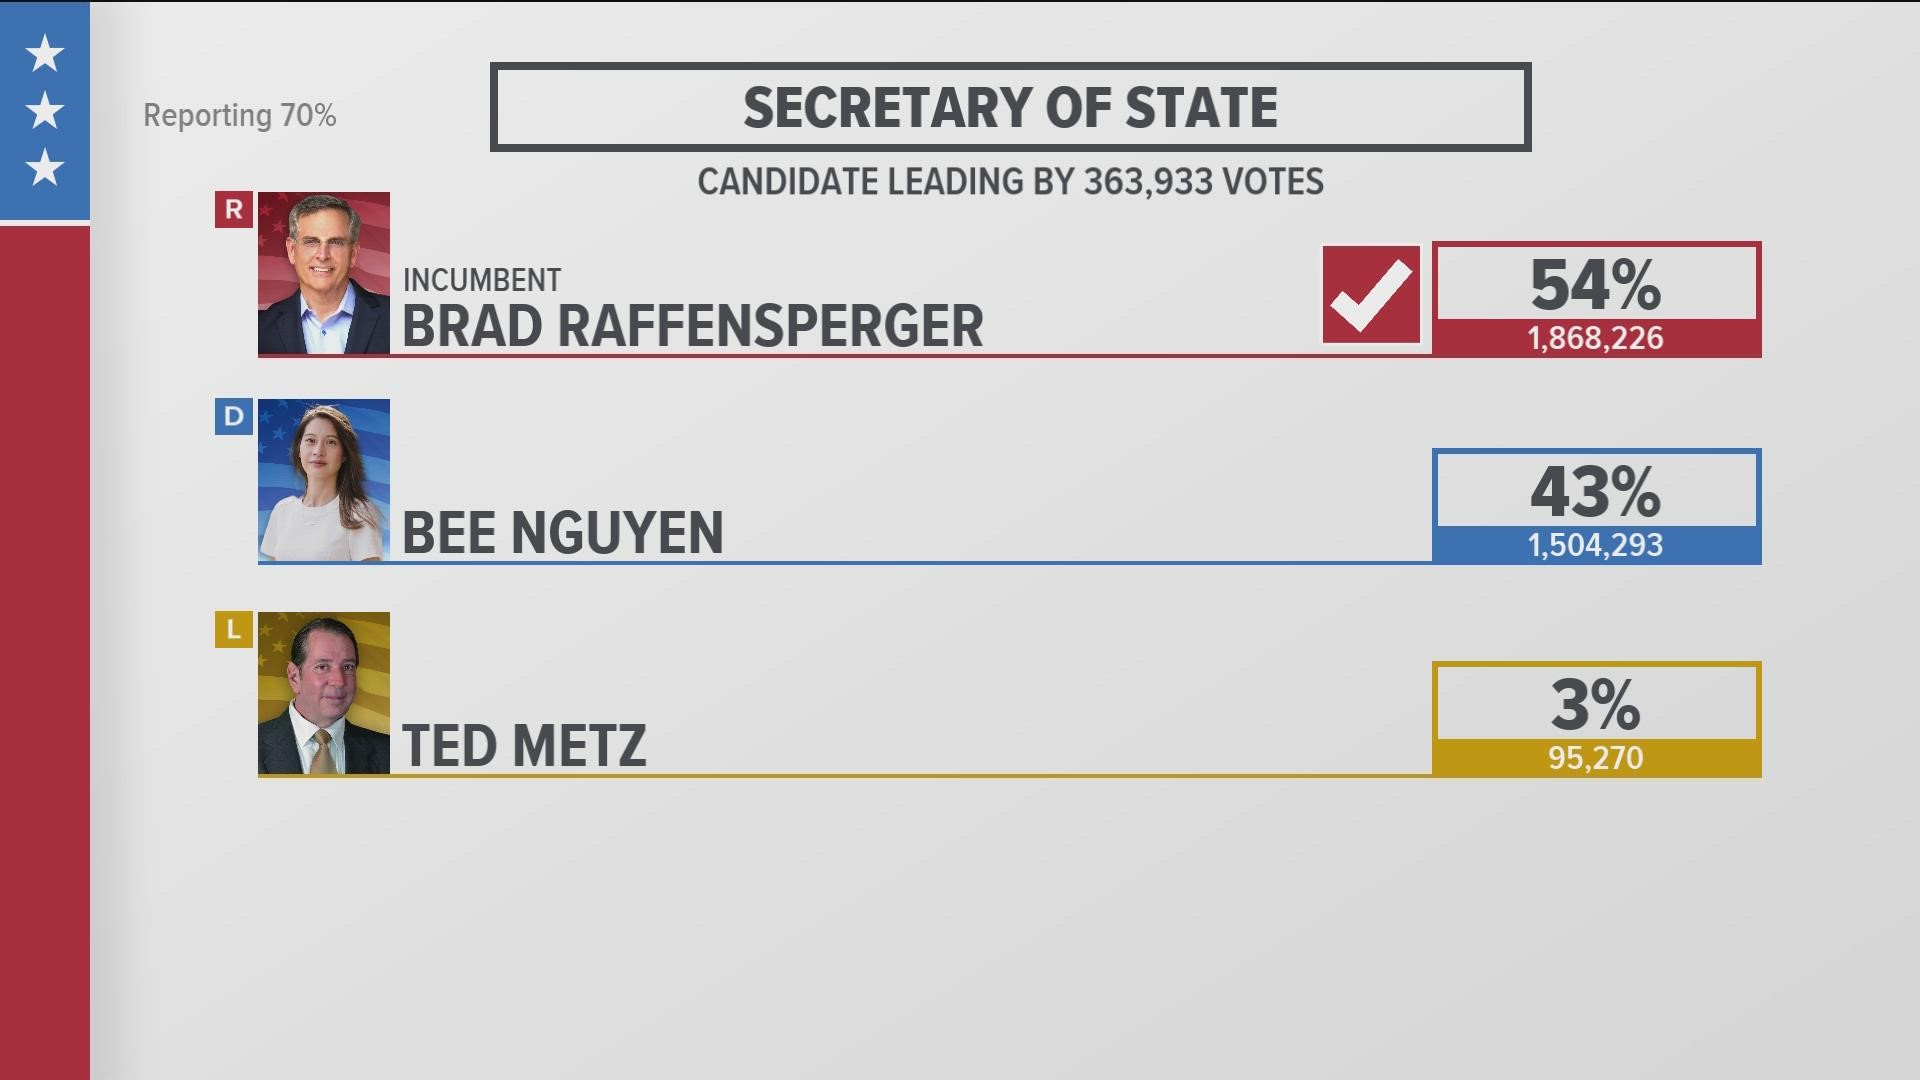 NBC projects that incumbent Brad Raffensperger is the winner of the secretary of state race in Georgia, defeating Bee Nguyen and Ted Metz.